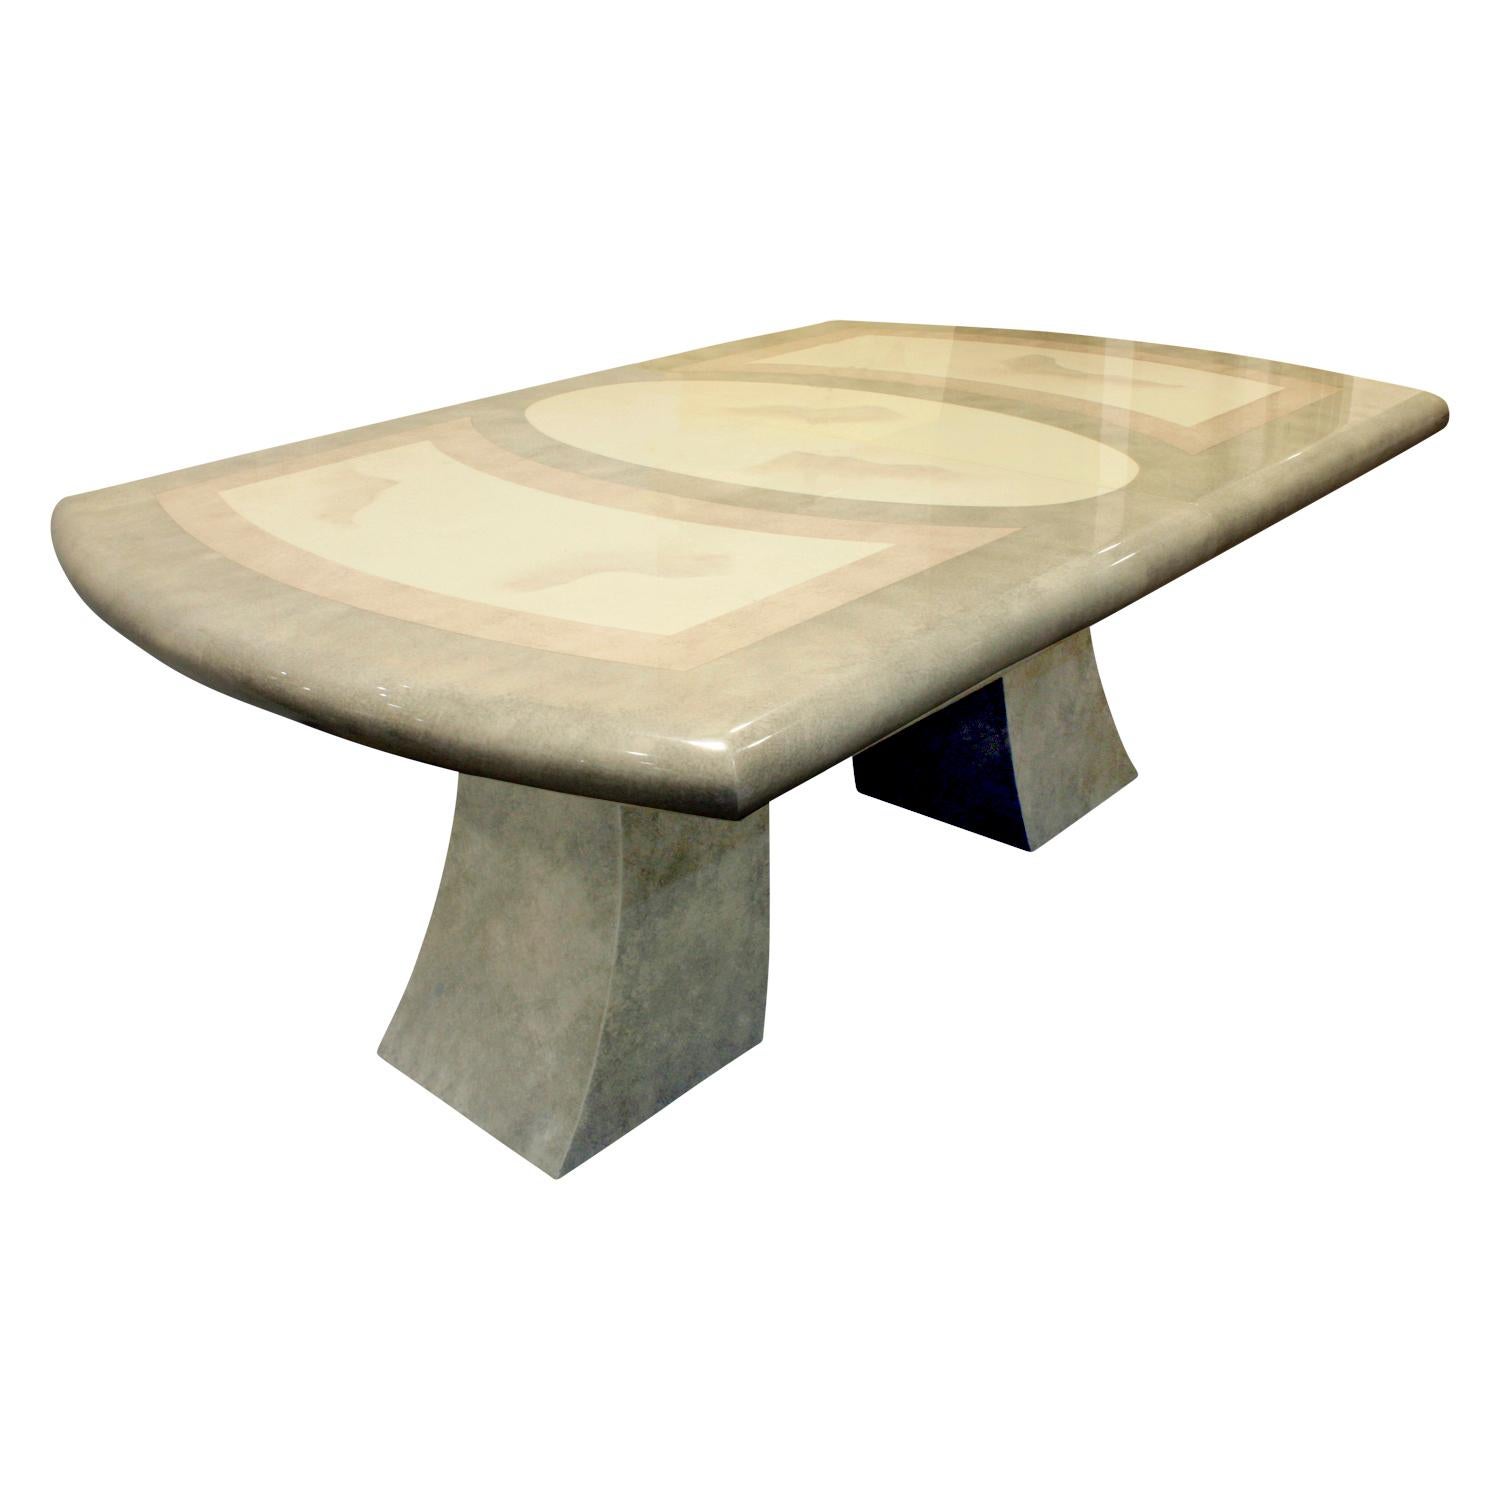 Karl Springer Style Extension Dining Table with Artisan Faux Goatskin, 1980s For Sale